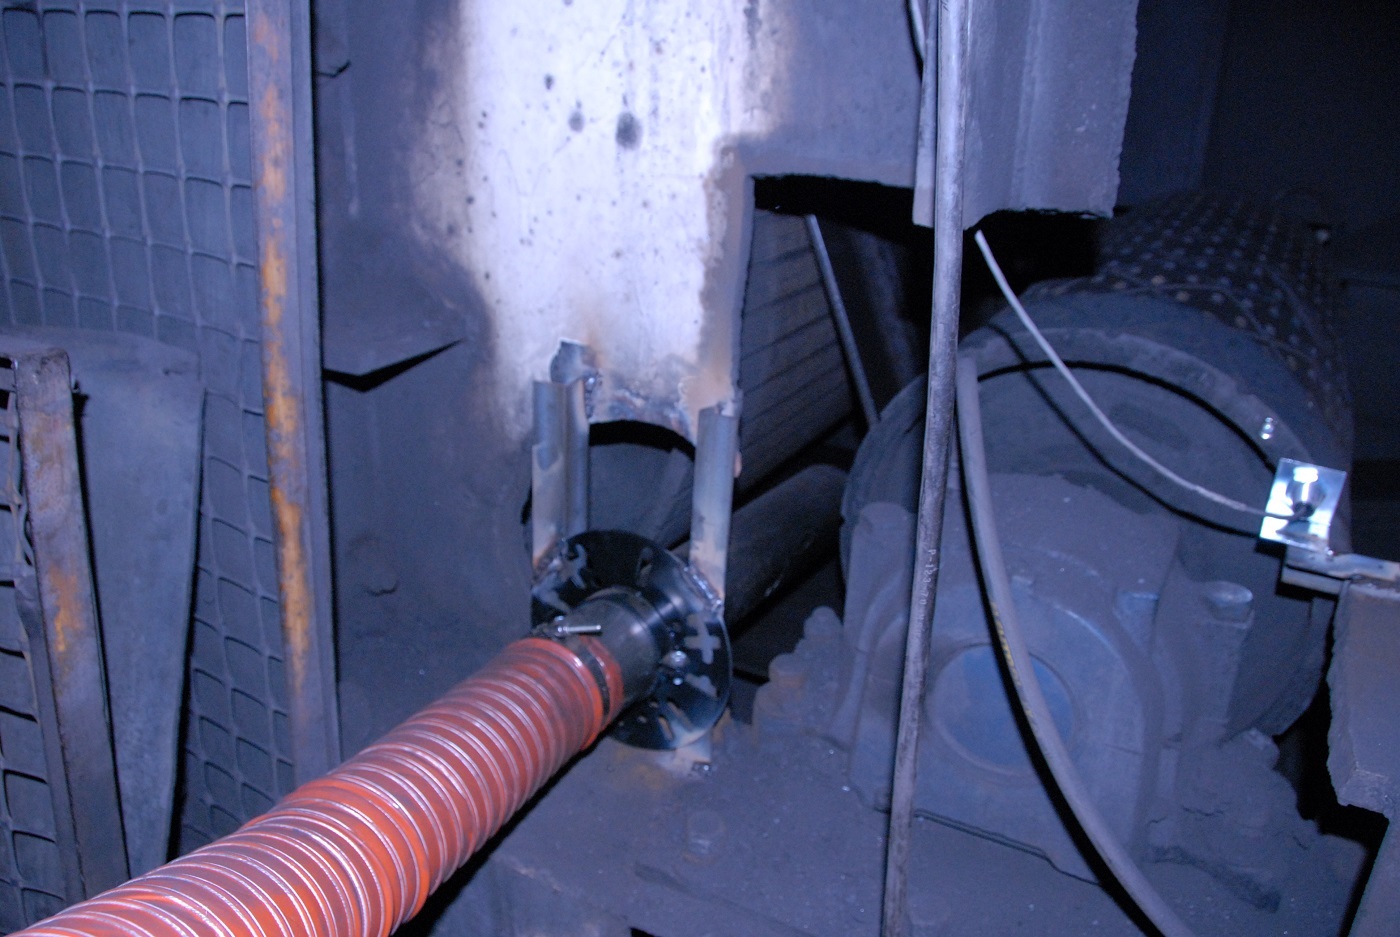 Pulley heater used in tight spaces.